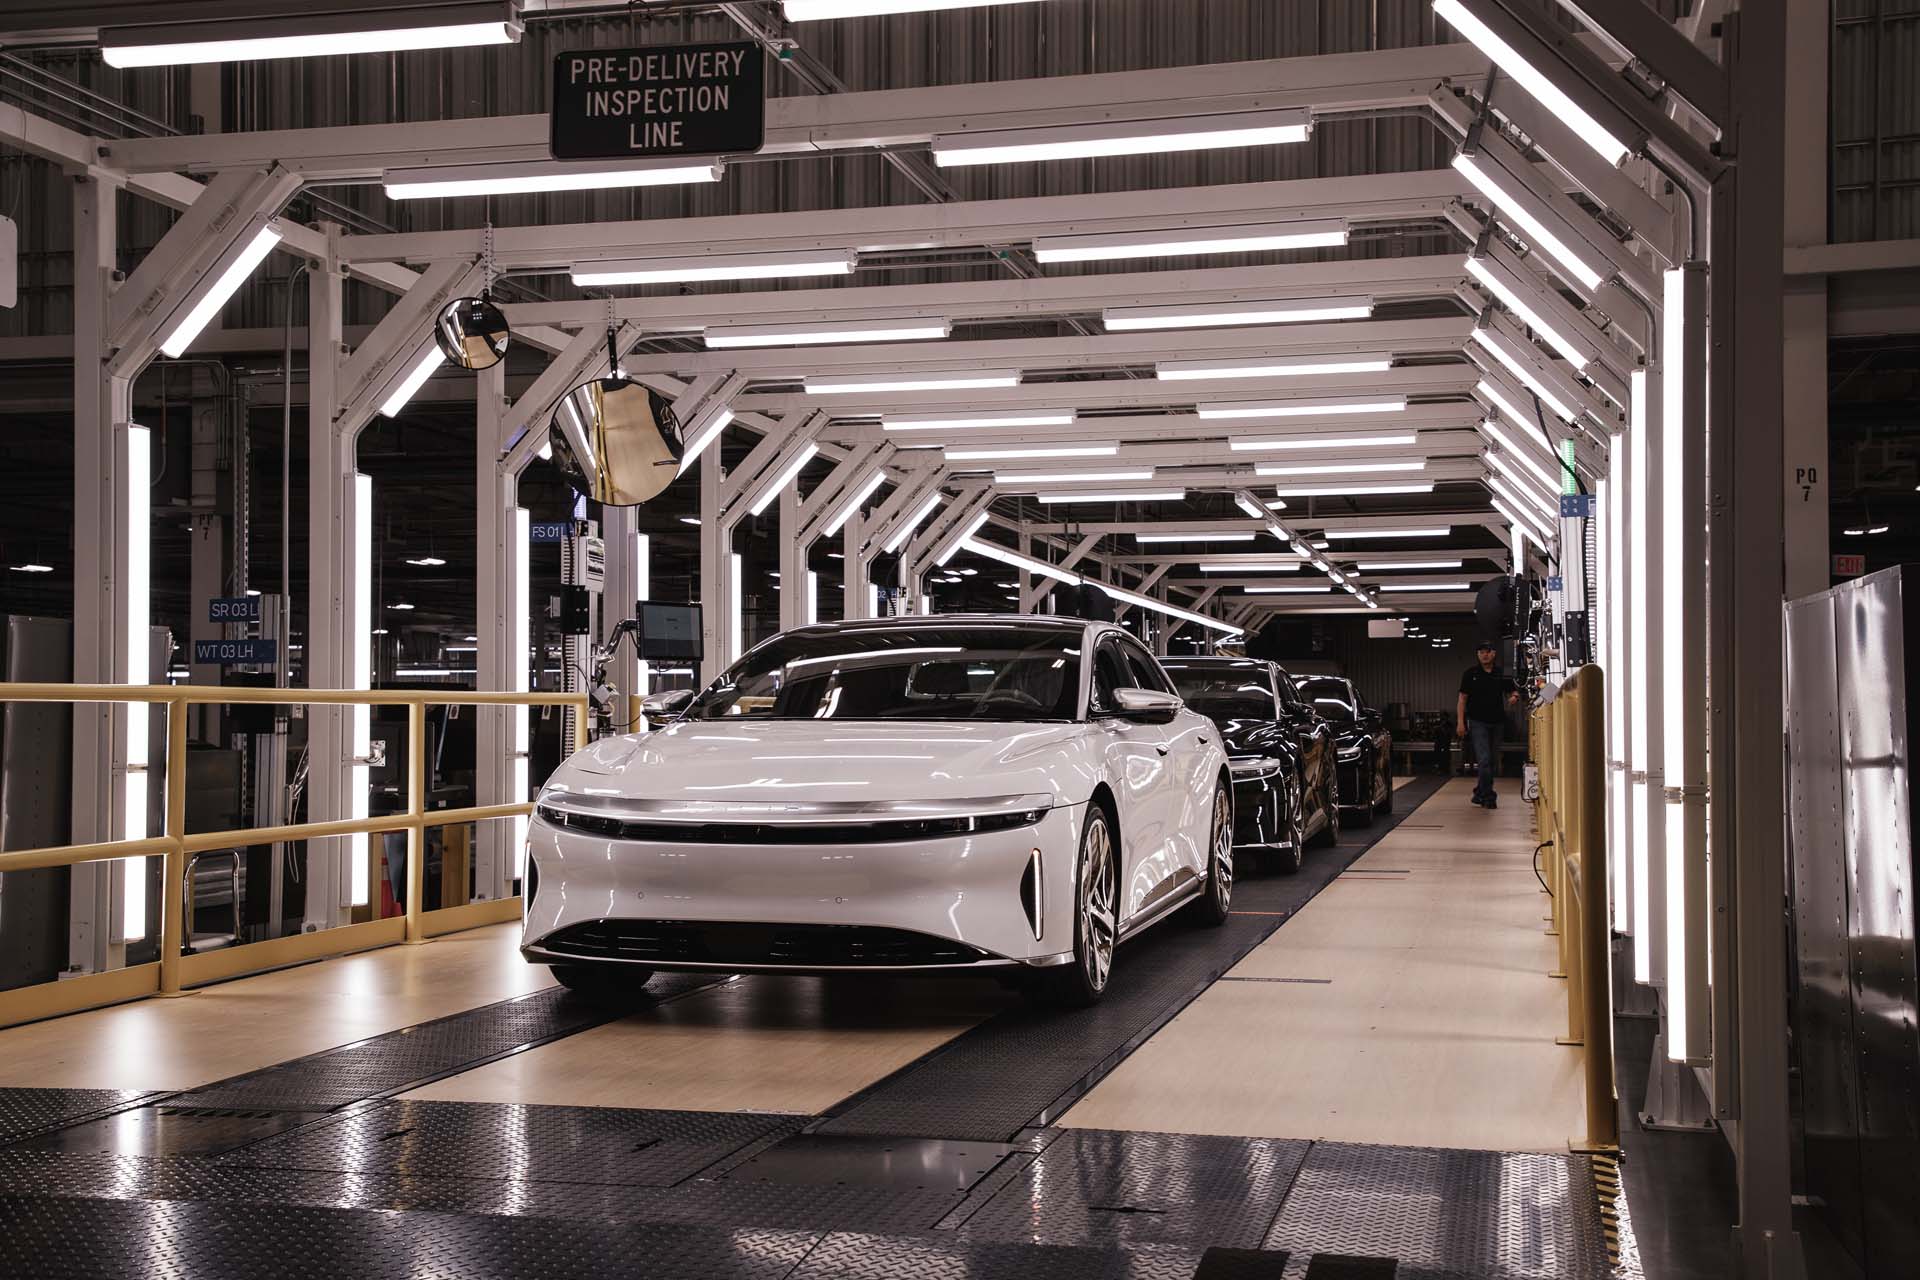 Lucid Air is in production, with first deliveries due in OctoberLucid Air is in production, with first deliveries due in October